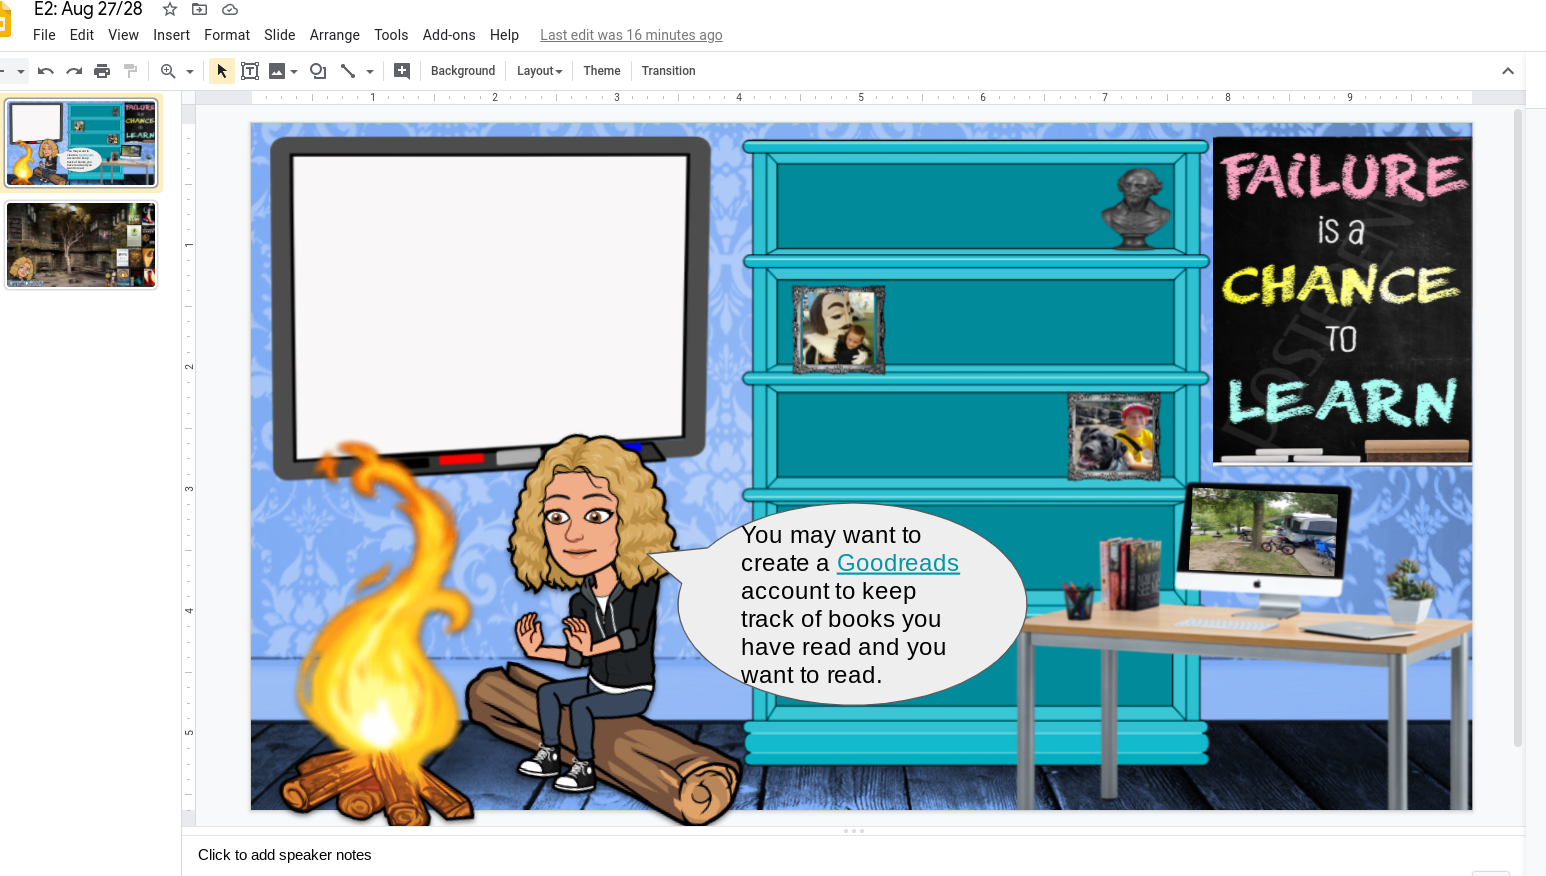 Classroom Screen Embed Slides 